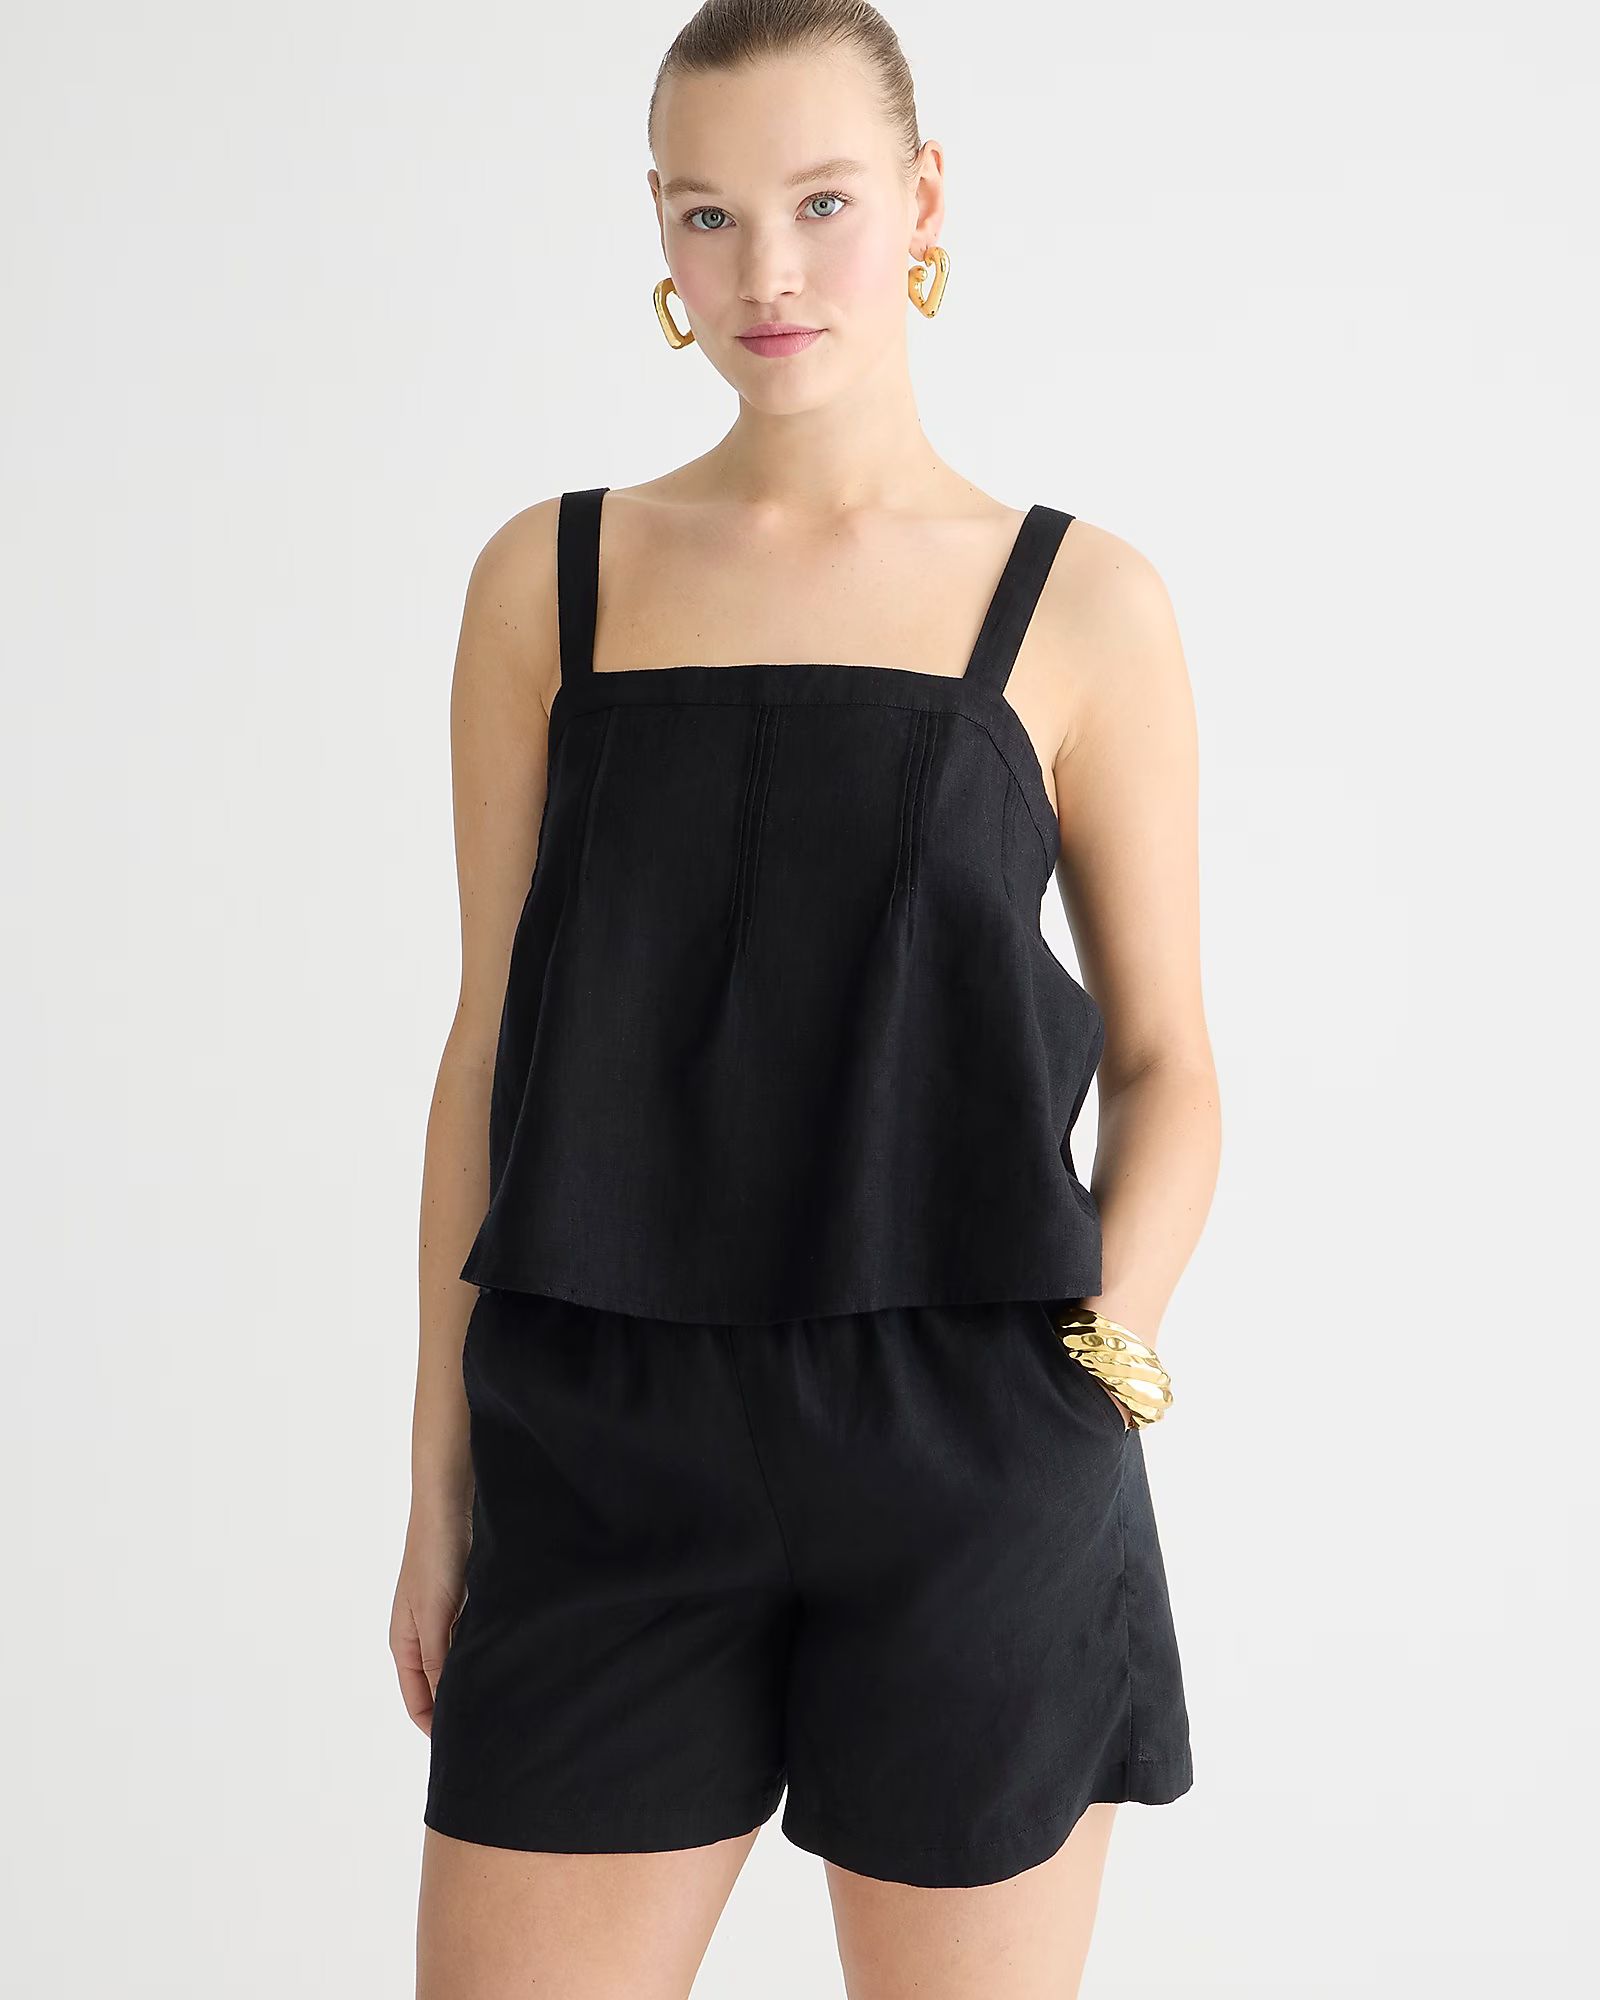 new4.0(1 REVIEWS)Bow-back linen top$79.5030% off full price with code SHOP30BlackSelect a sizeSiz... | J.Crew US